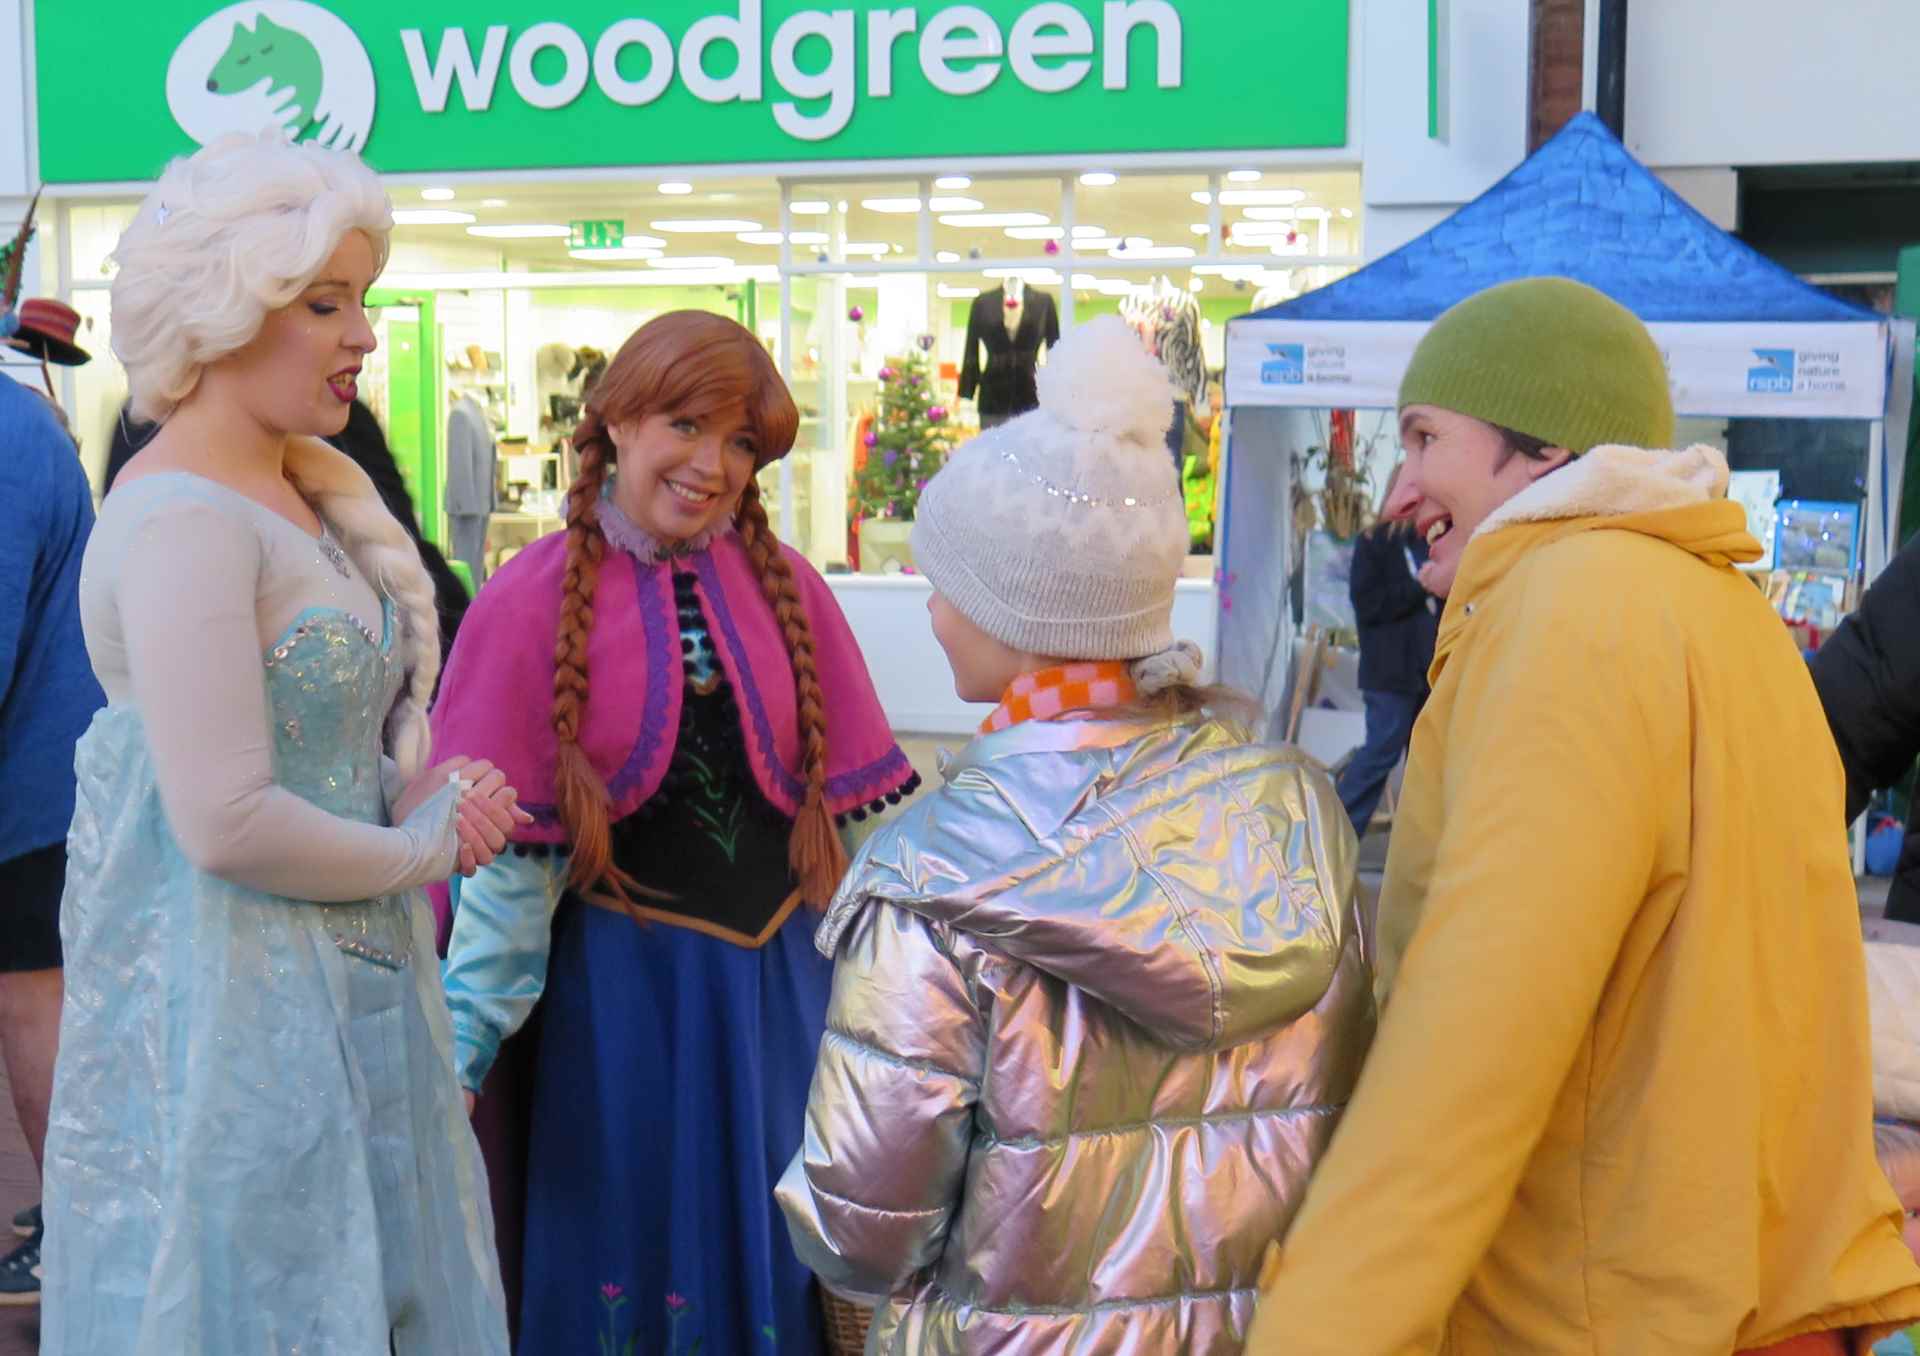 The Ice Princesses pictured talking to a family. One princess is dressed in a light blue flowing glittering dress and with a long white plaited braid. The second princess has two ginger plaits with a pink and blue dress.